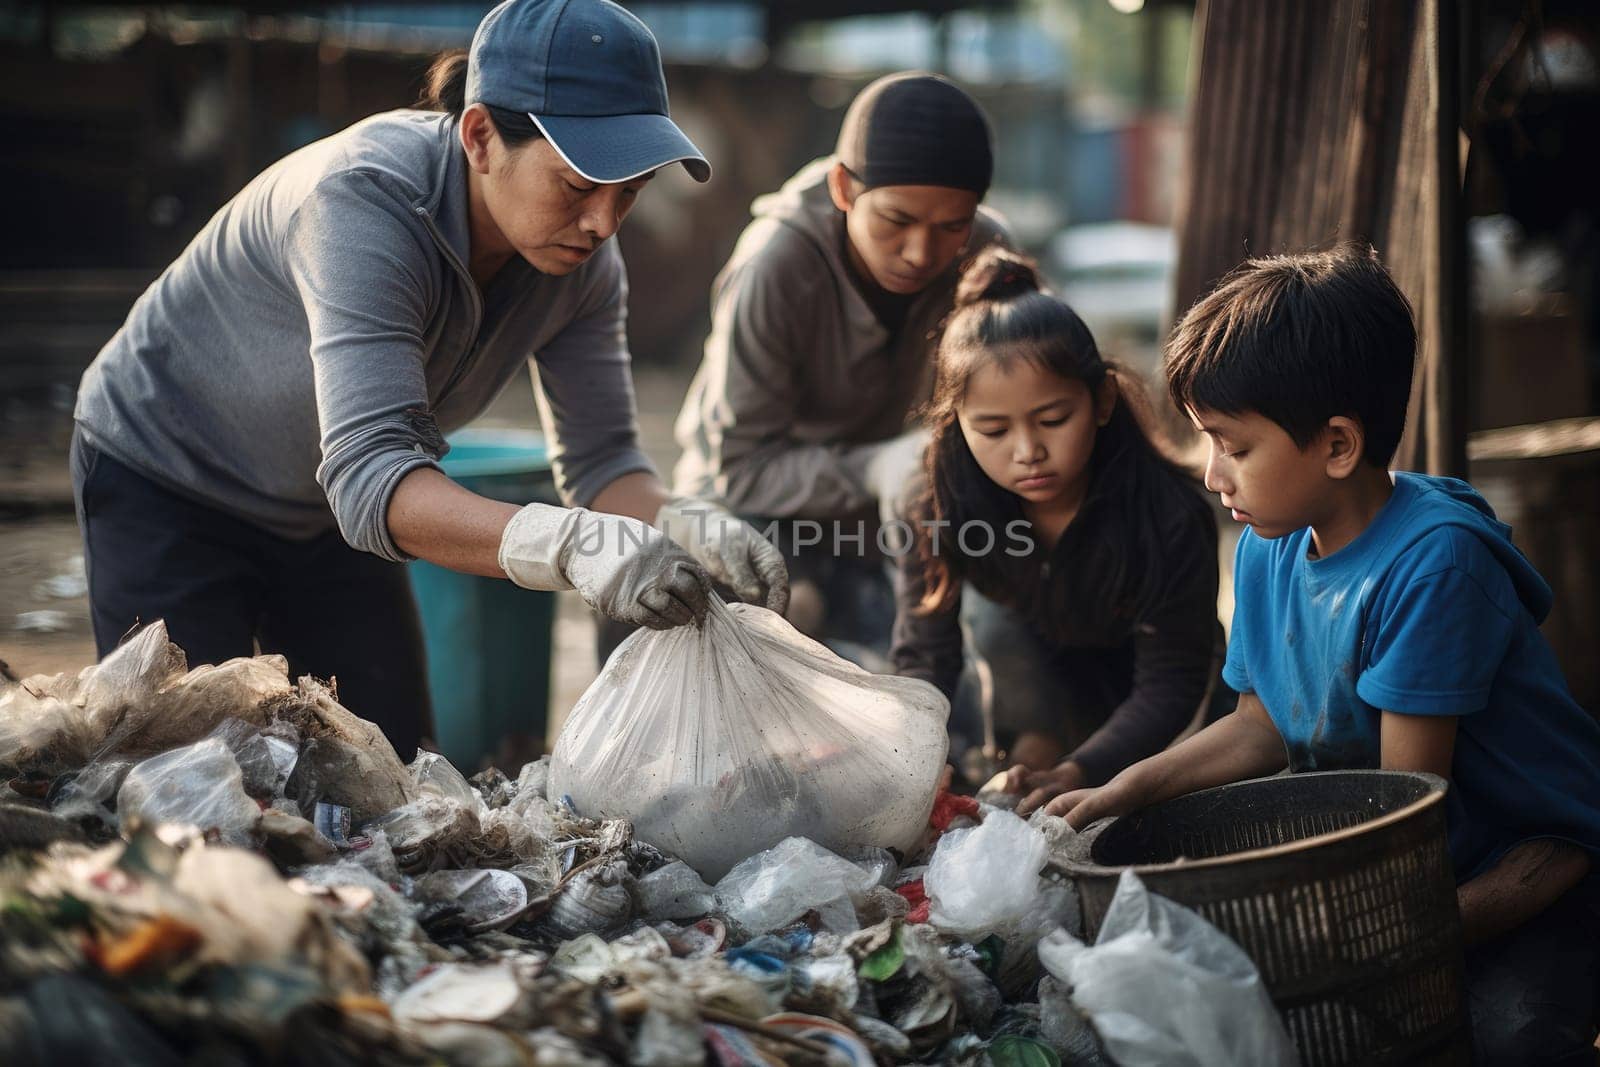 People sorting garbage, paper and organics for recycling.